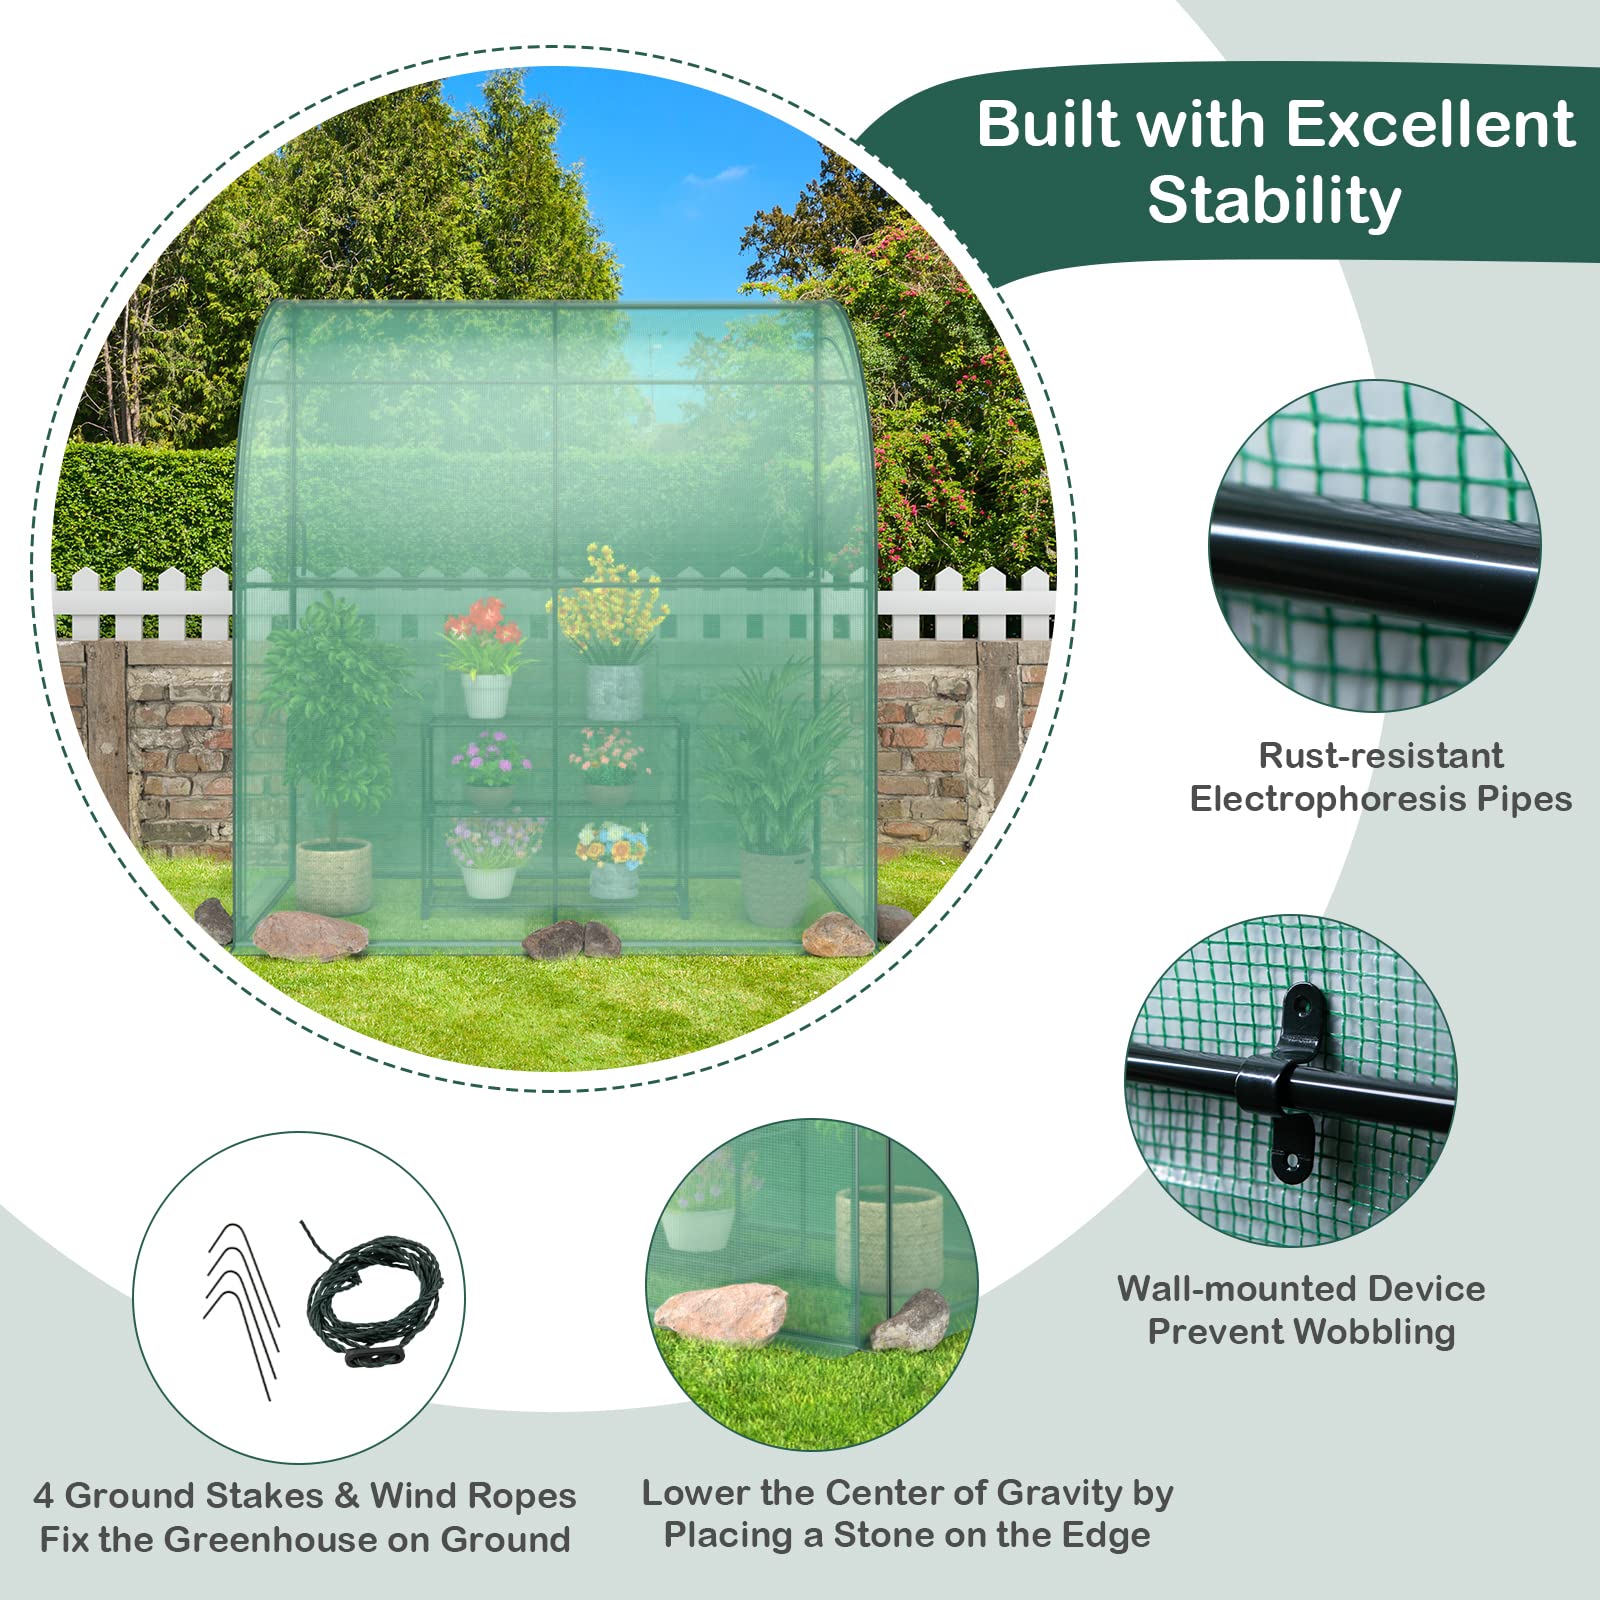 Giantex Walk-in Lean-to Greenhouse - with 3-Tier Plant Stand, 7’x 3.5’x 7’ Green House, PE Grid Cover